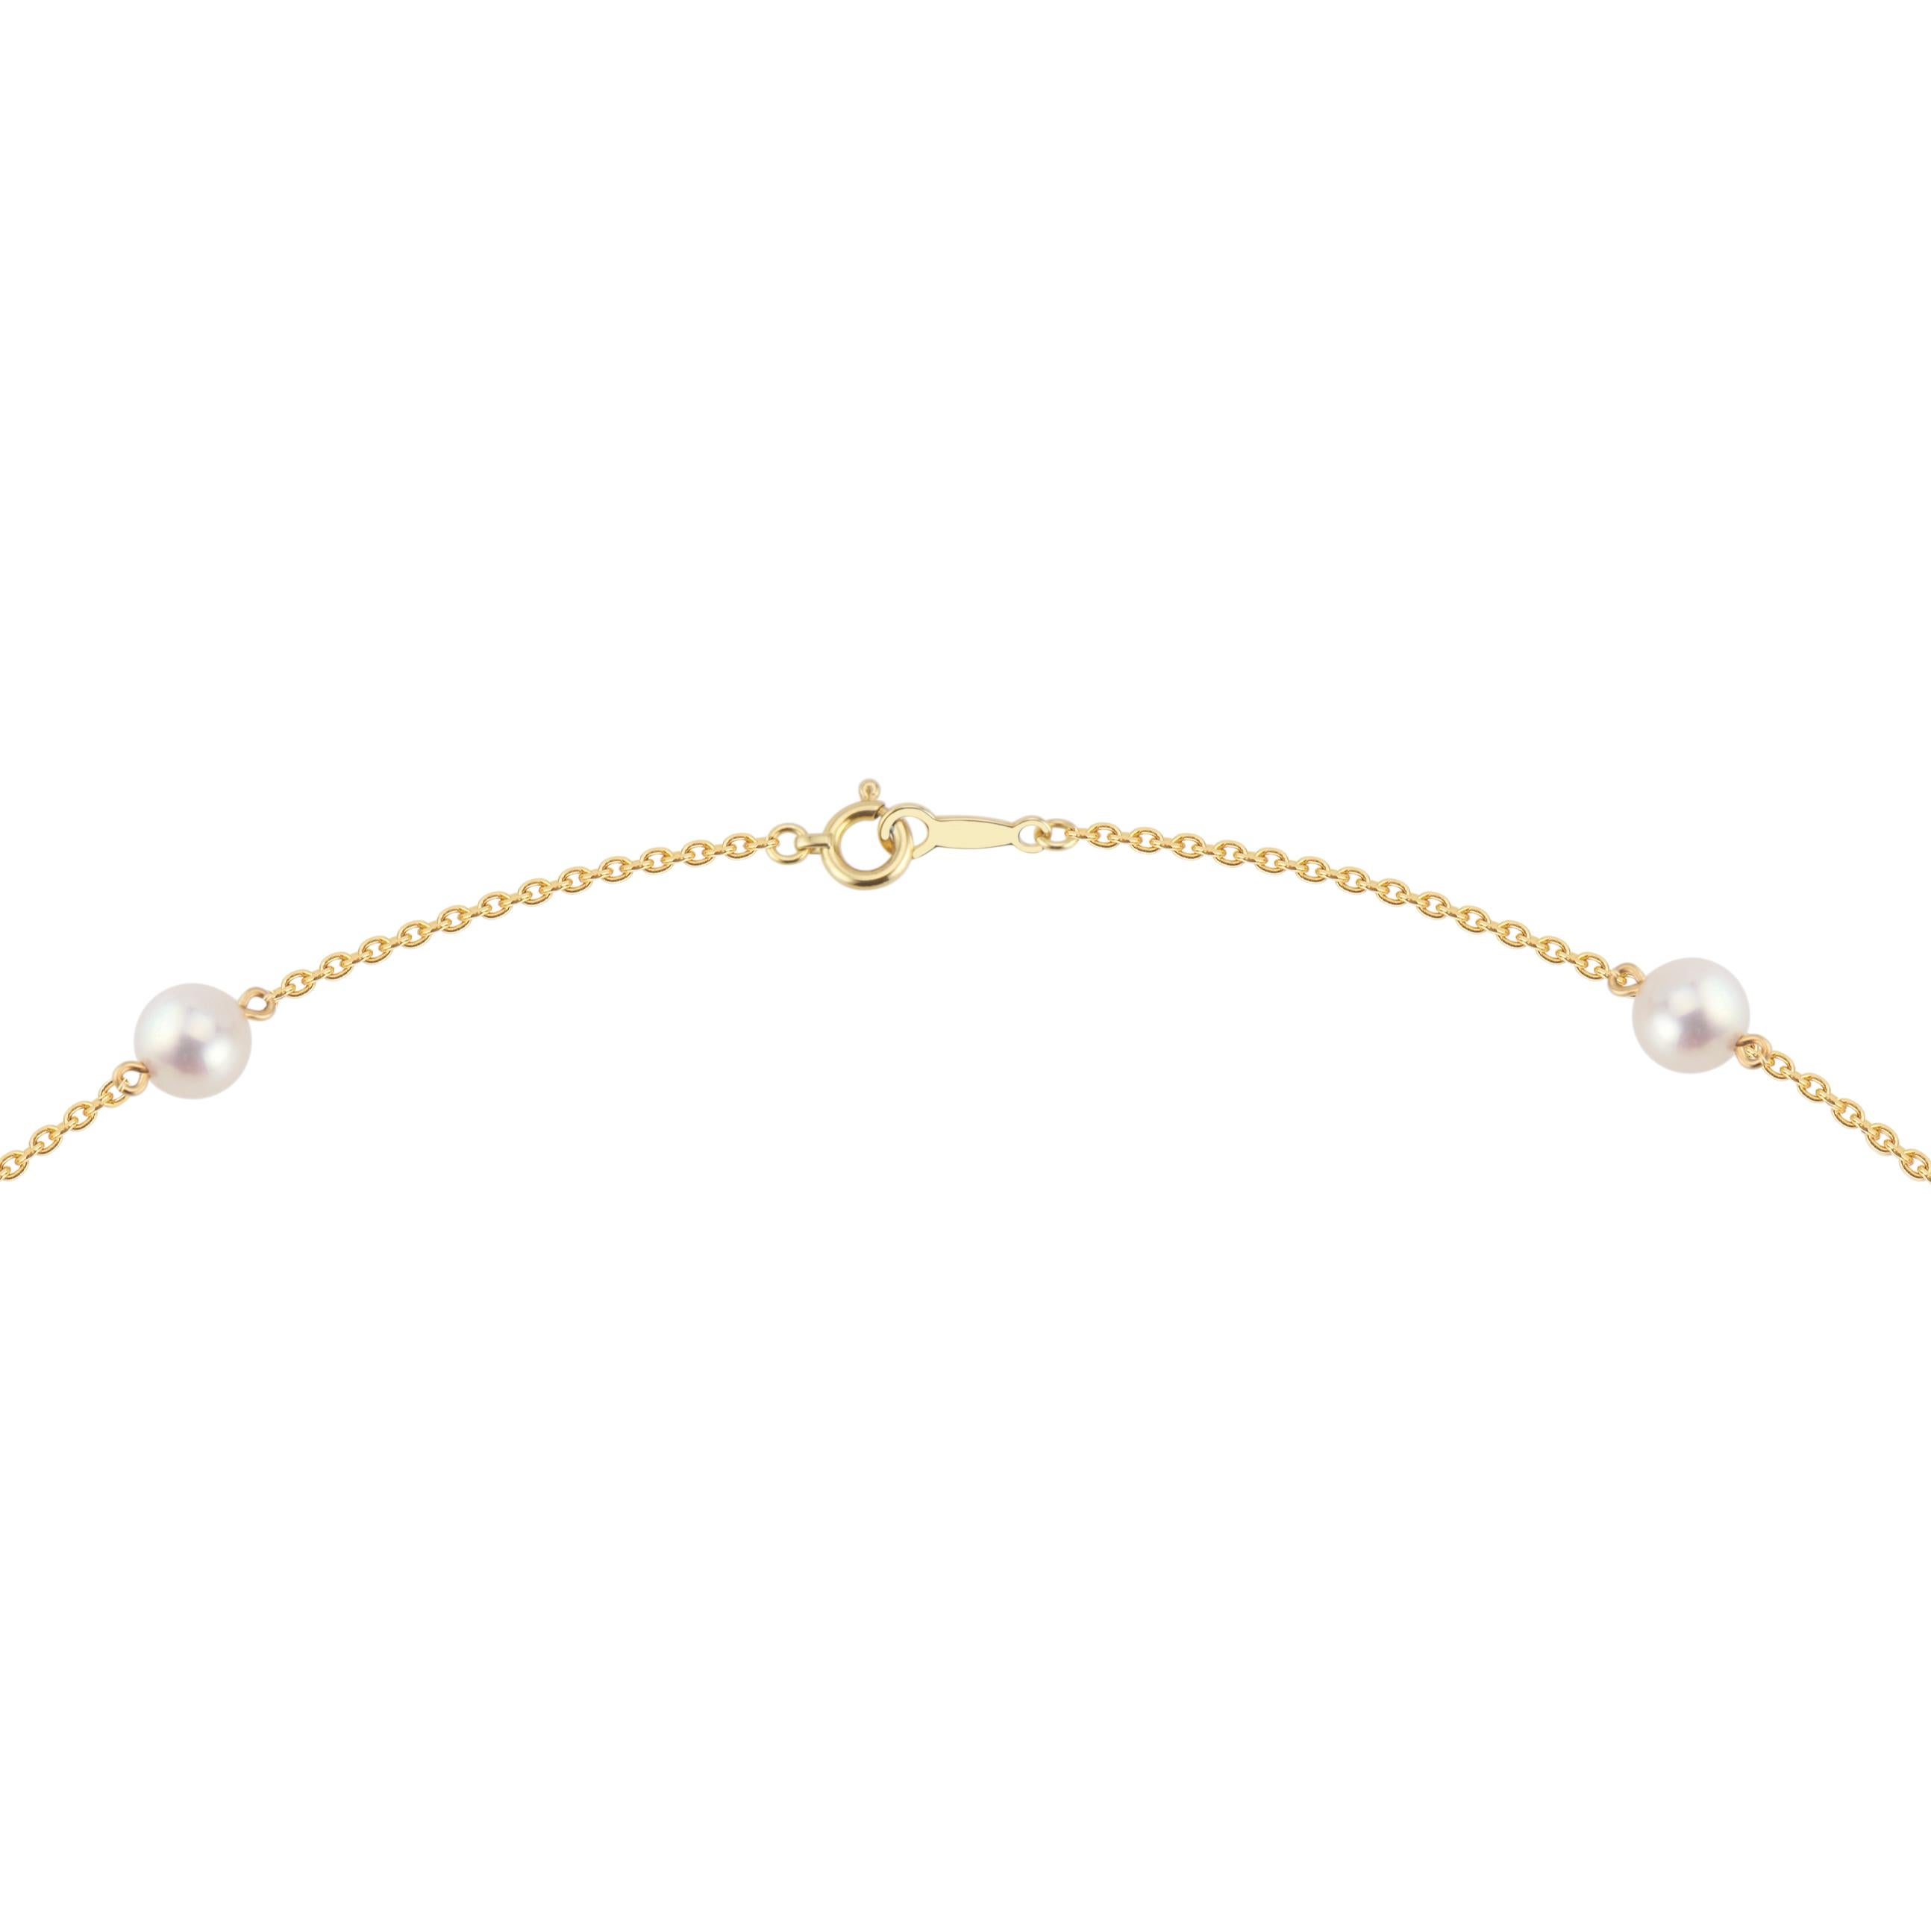 Mikimoto 11 pearl station necklace in 18k yellow gold.  6mm pearls with a rose hue. 18 inches. 

11 cultured rose hue pearls
18k yellow gold 
5.0 grams
Stamped: 750
Hallmark: M
Chain: 18 Inches
